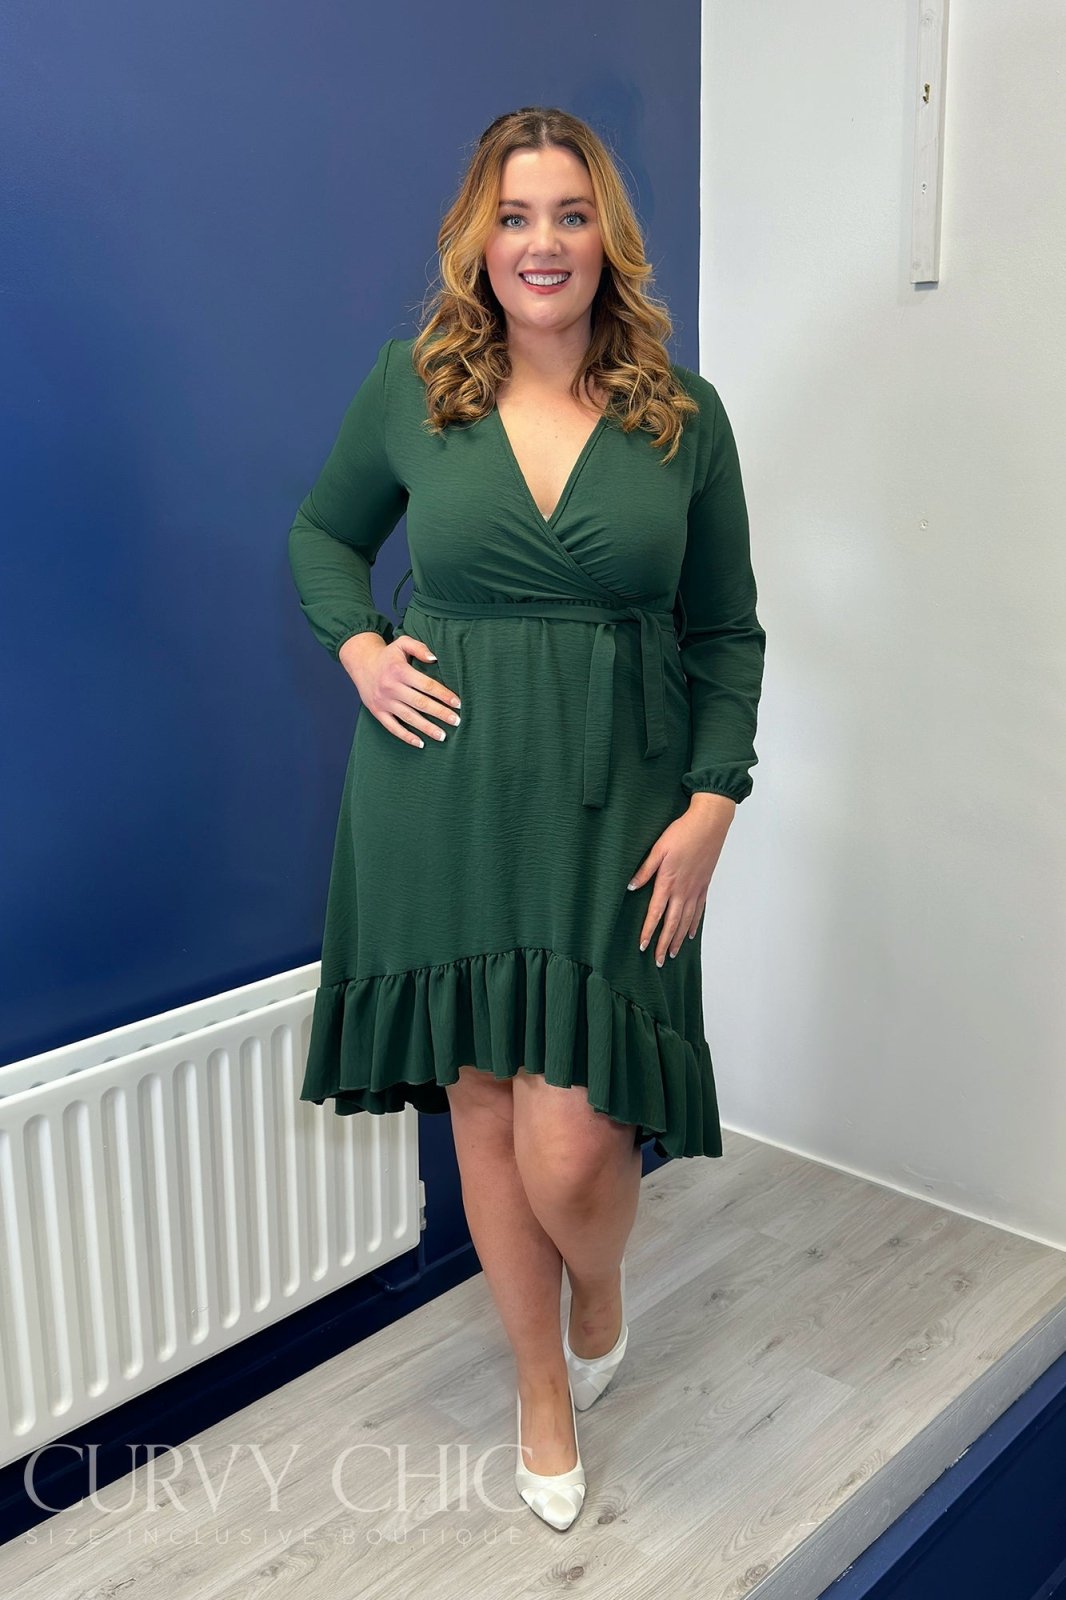 Wrap Plus Size Dress with Ruffle Detail in Black, Pink or Forest Green - Curvy Chic Boutique